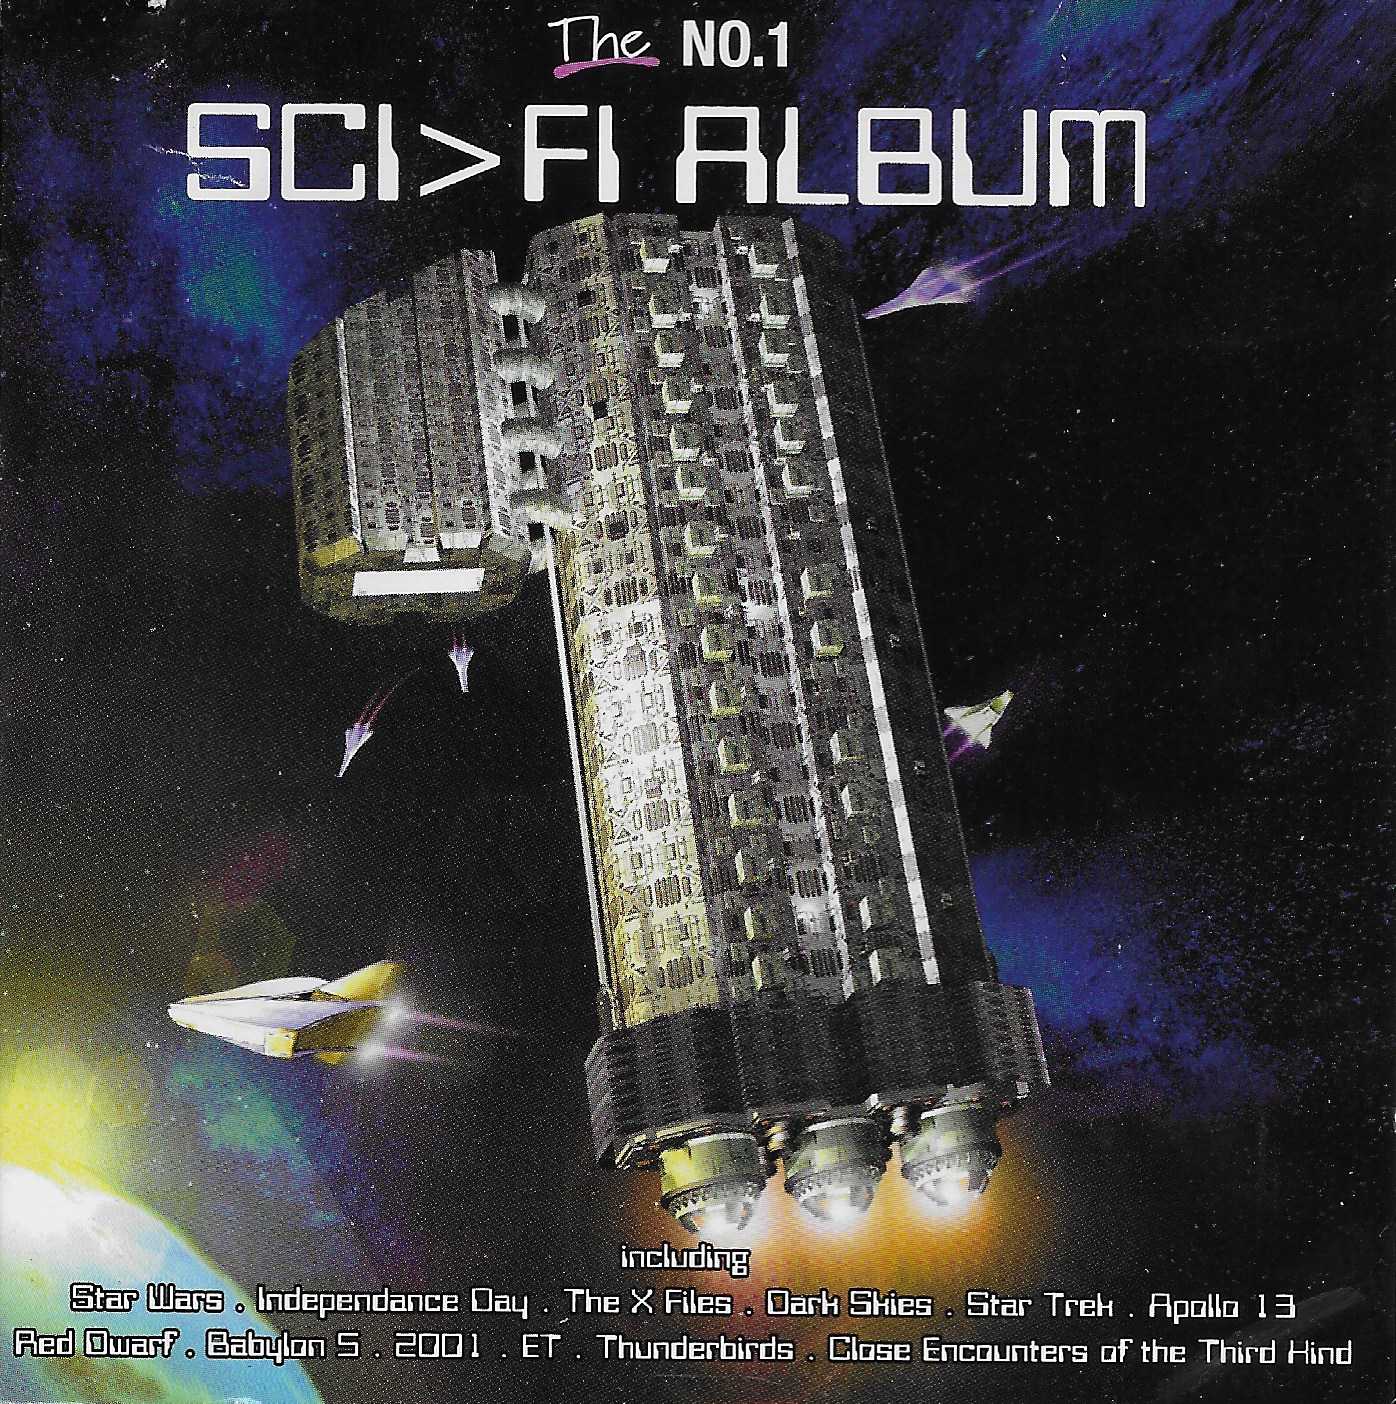 Picture of Sci > fi album (The no. 1) by artist Various from ITV, Channel 4 and Channel 5 cds library